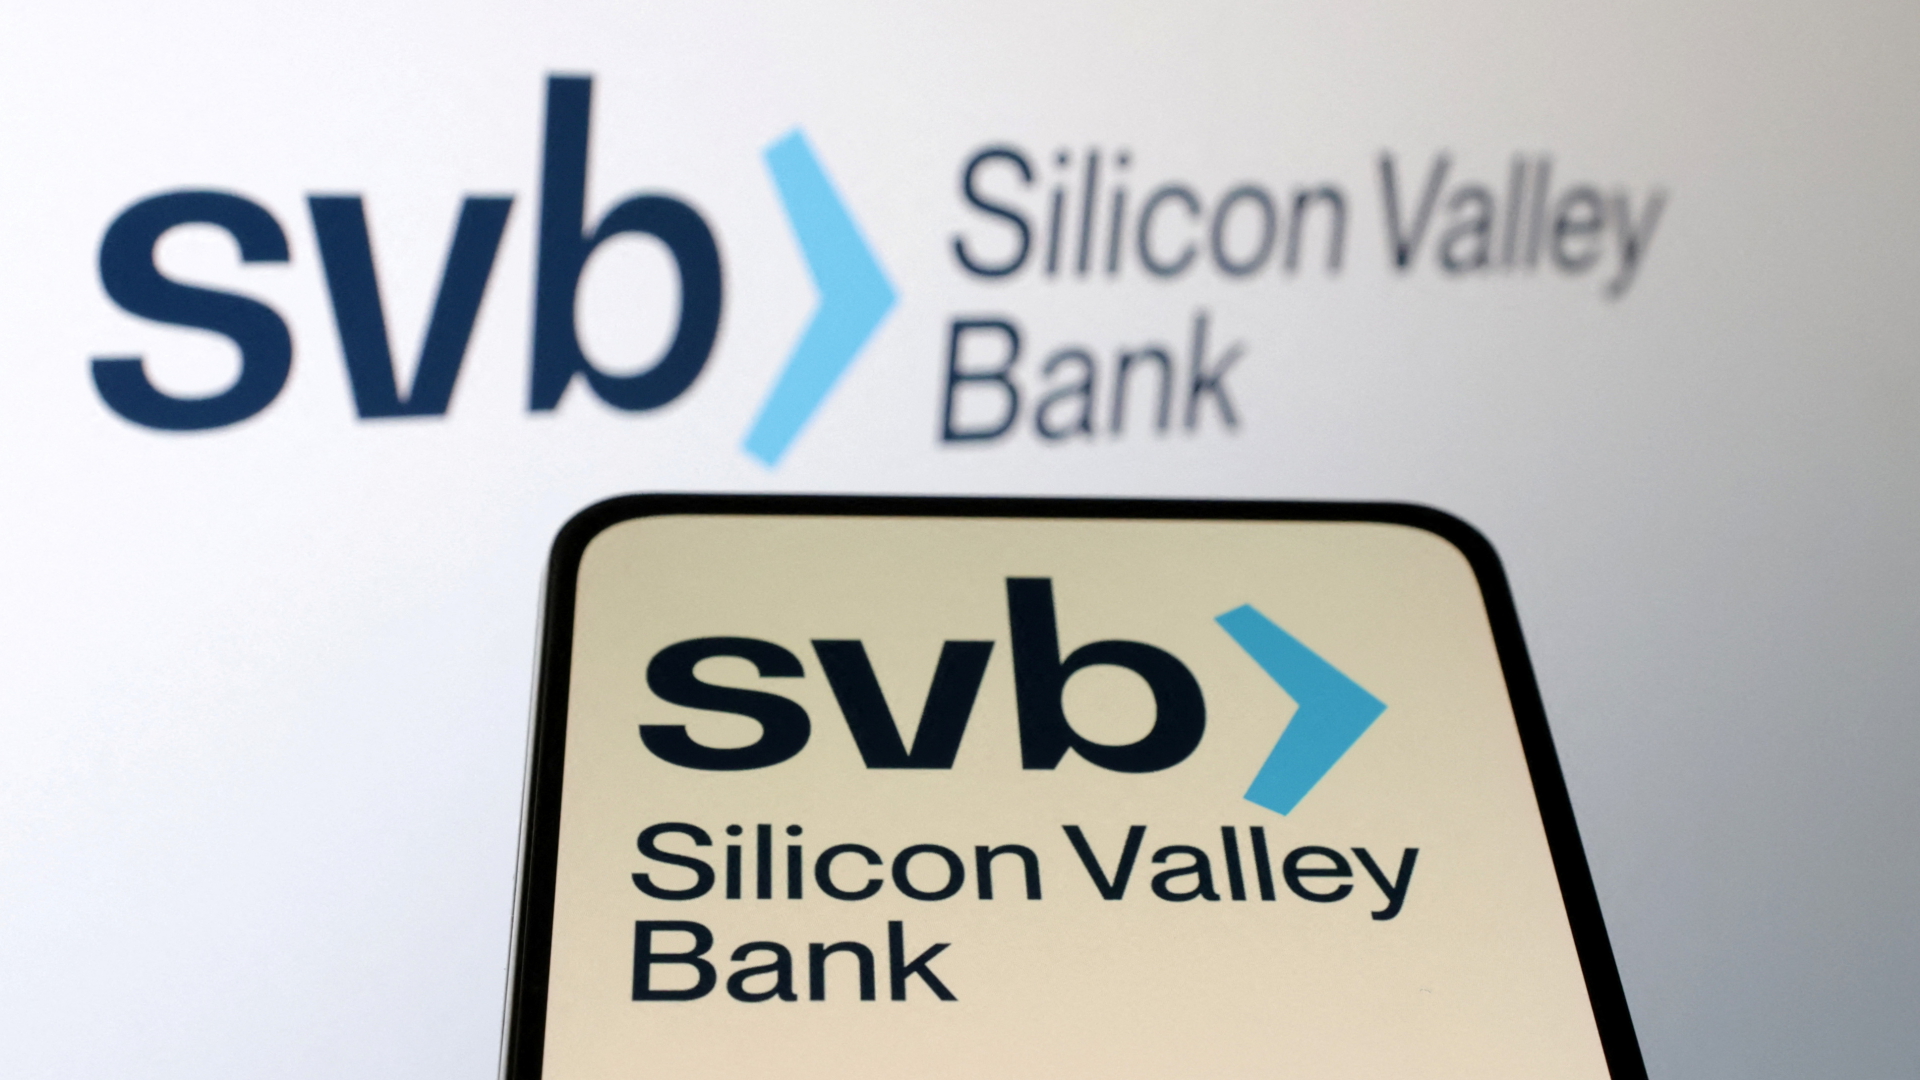 The house of money is in crisis: the US authorities close the Silicon Valley bank